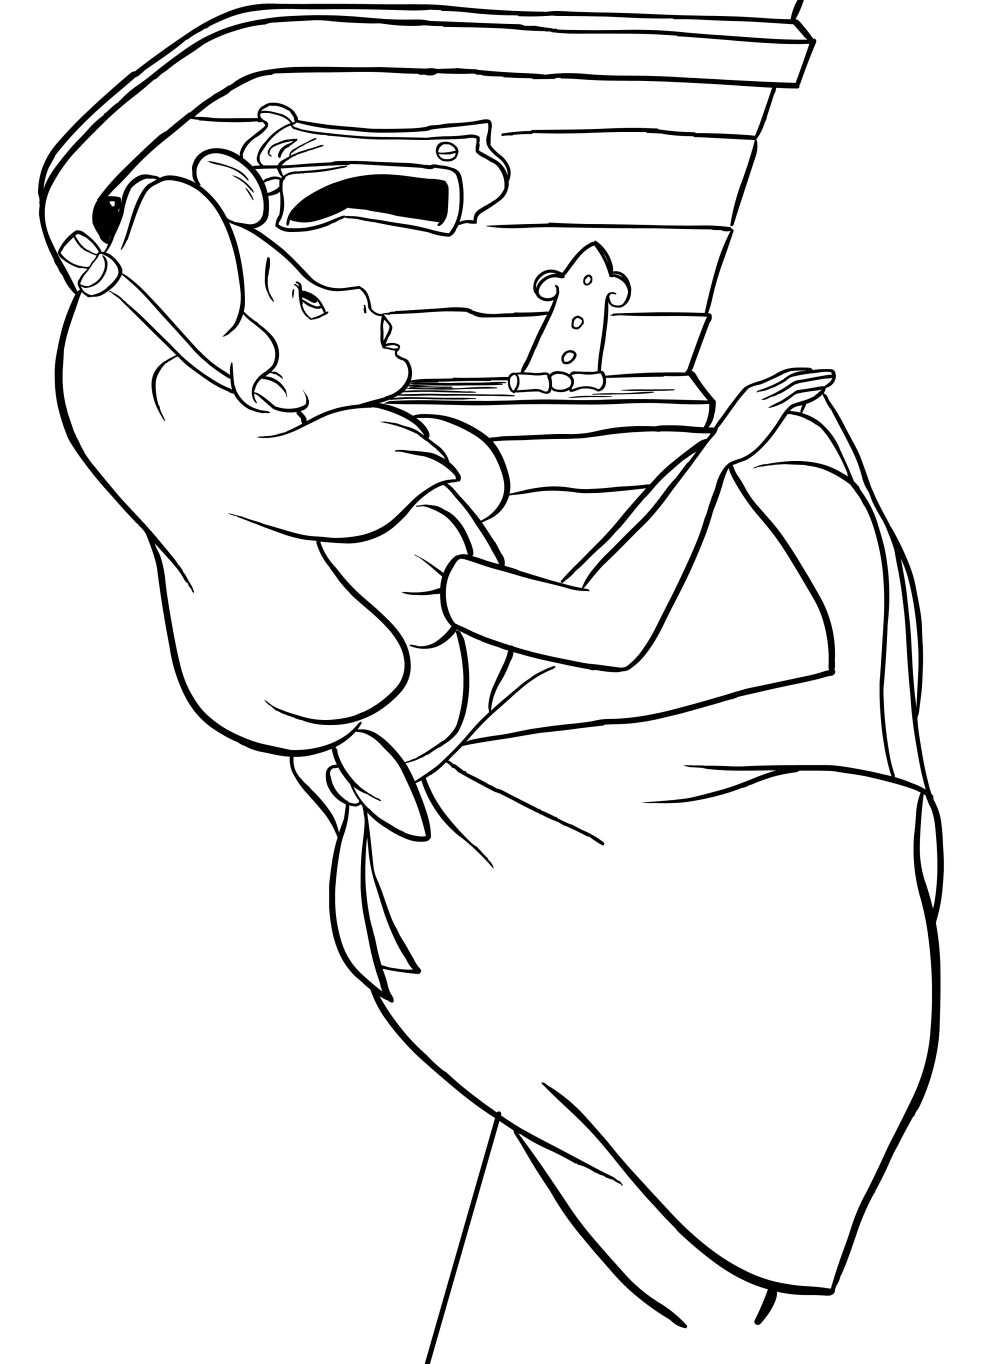  Alice with the small speaker door, coloring page to print